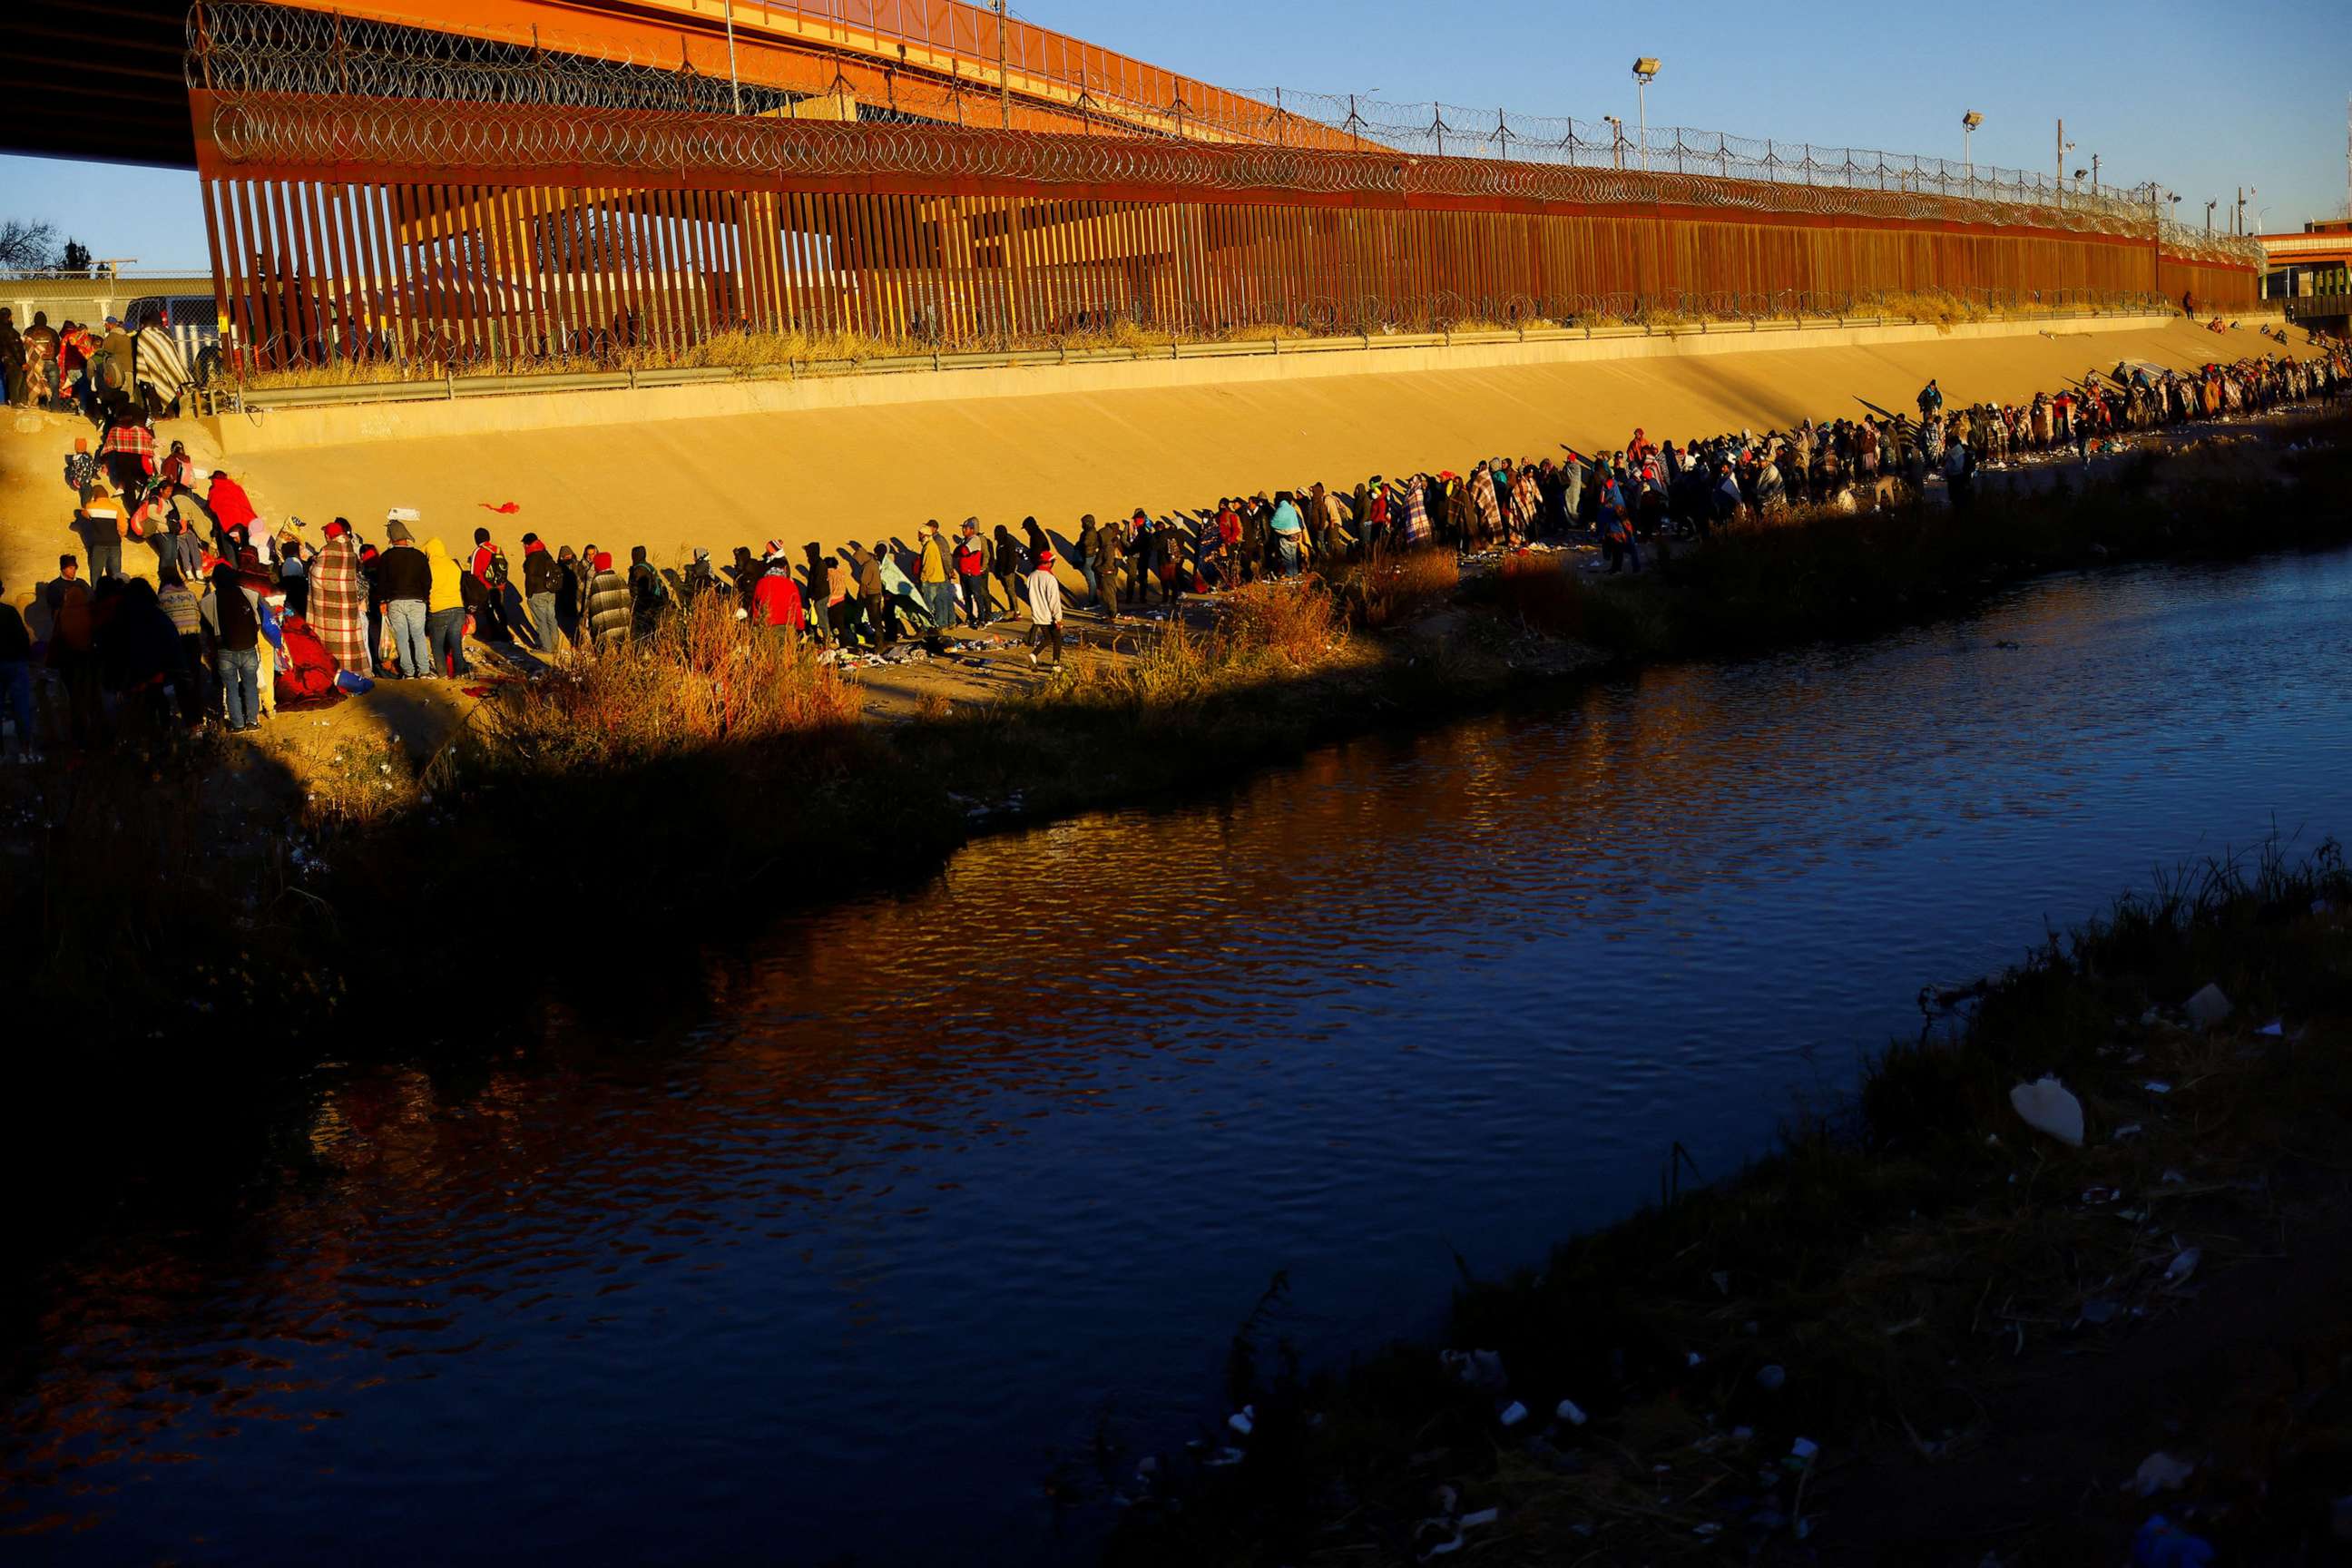 PHOTO: Migrants queue near the border wall after crossing the Rio Bravo river to turn themselves in to U.S. Border Patrol agents to request asylum in the U.S. city of El Paso, Texas, as seen from Ciudad Juarez, Mexico, on Dec. 14, 2022.